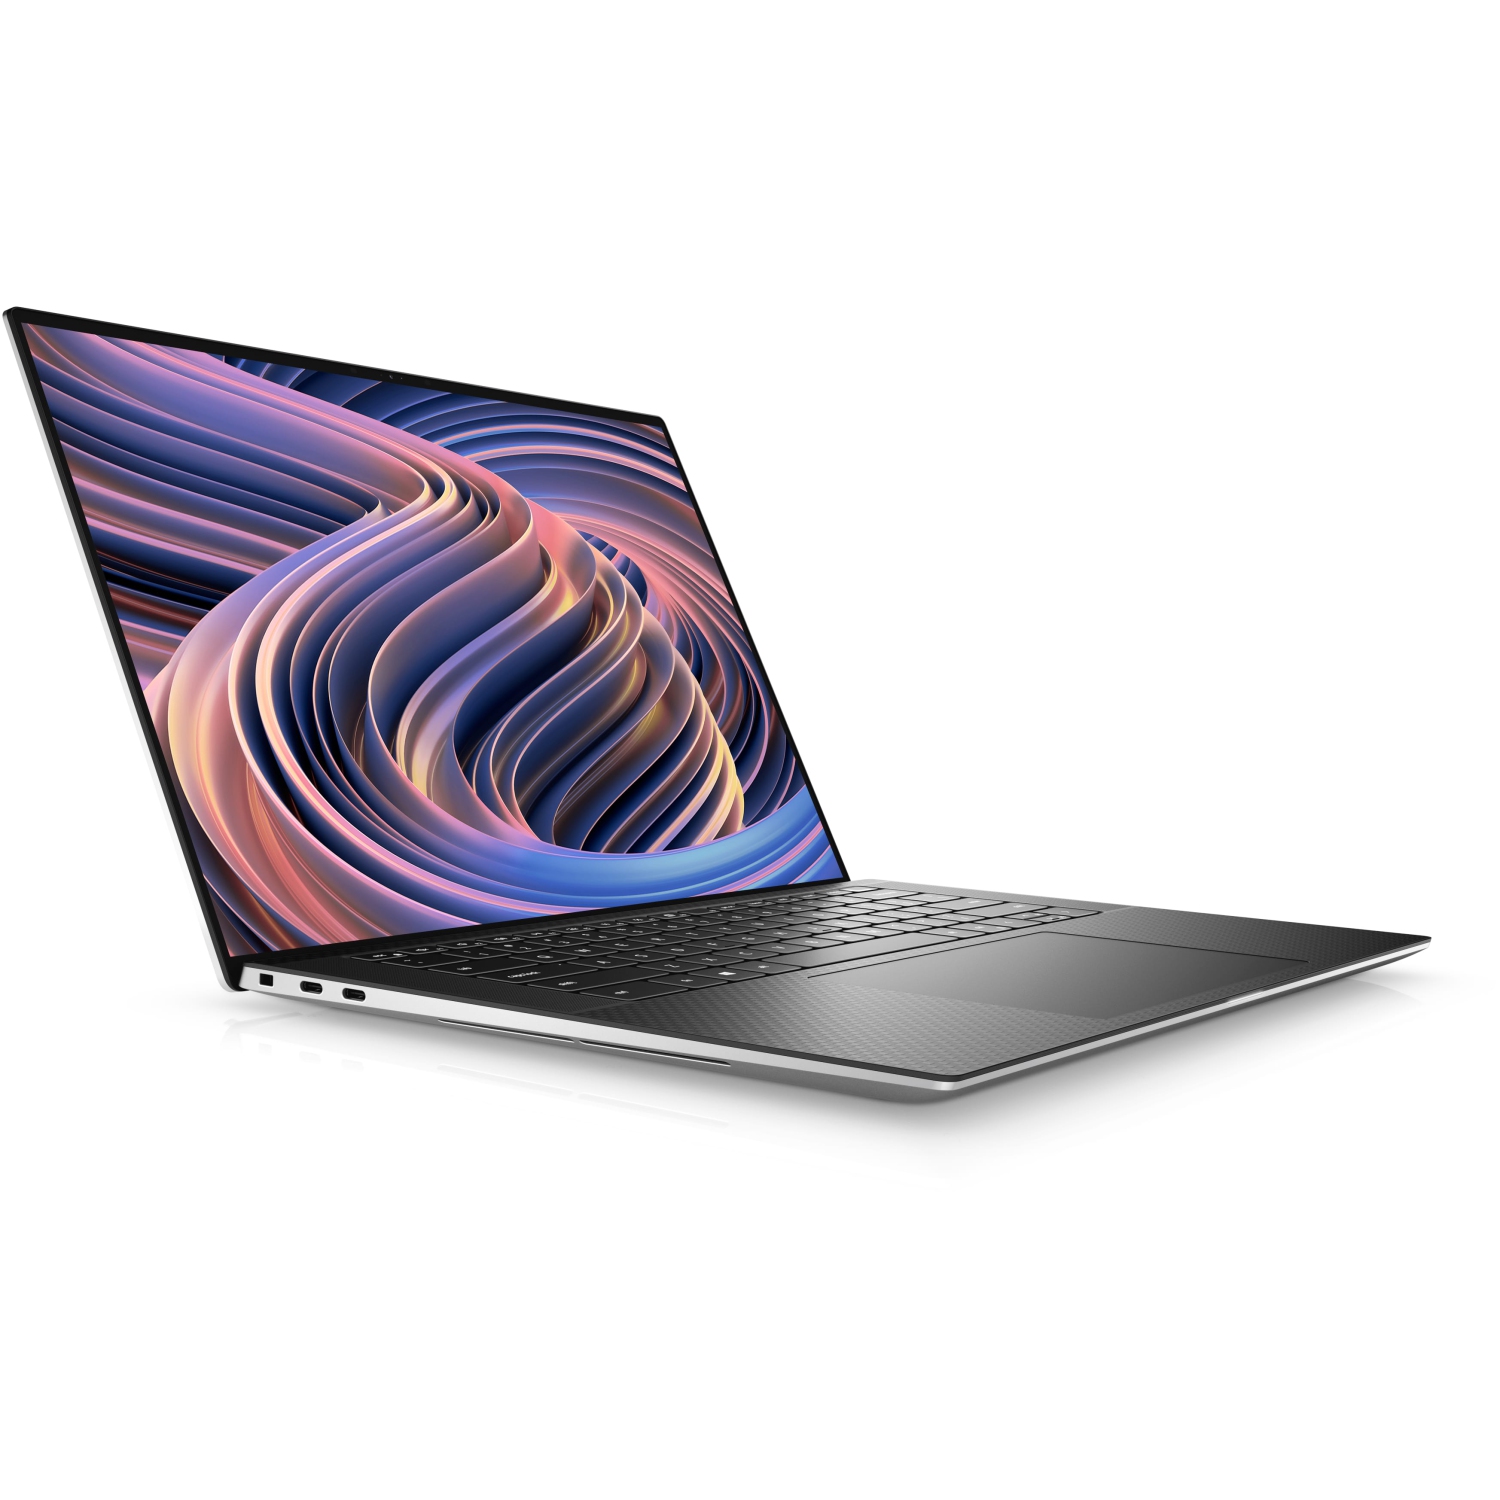 Refurbished (Excellent) - Dell XPS 15 9520, 15" FHD, Nvidia RTX 3050, i7-12700H, 32GB RAM, 1TB SSD, WIN 11 HOME - Certified Refurbished